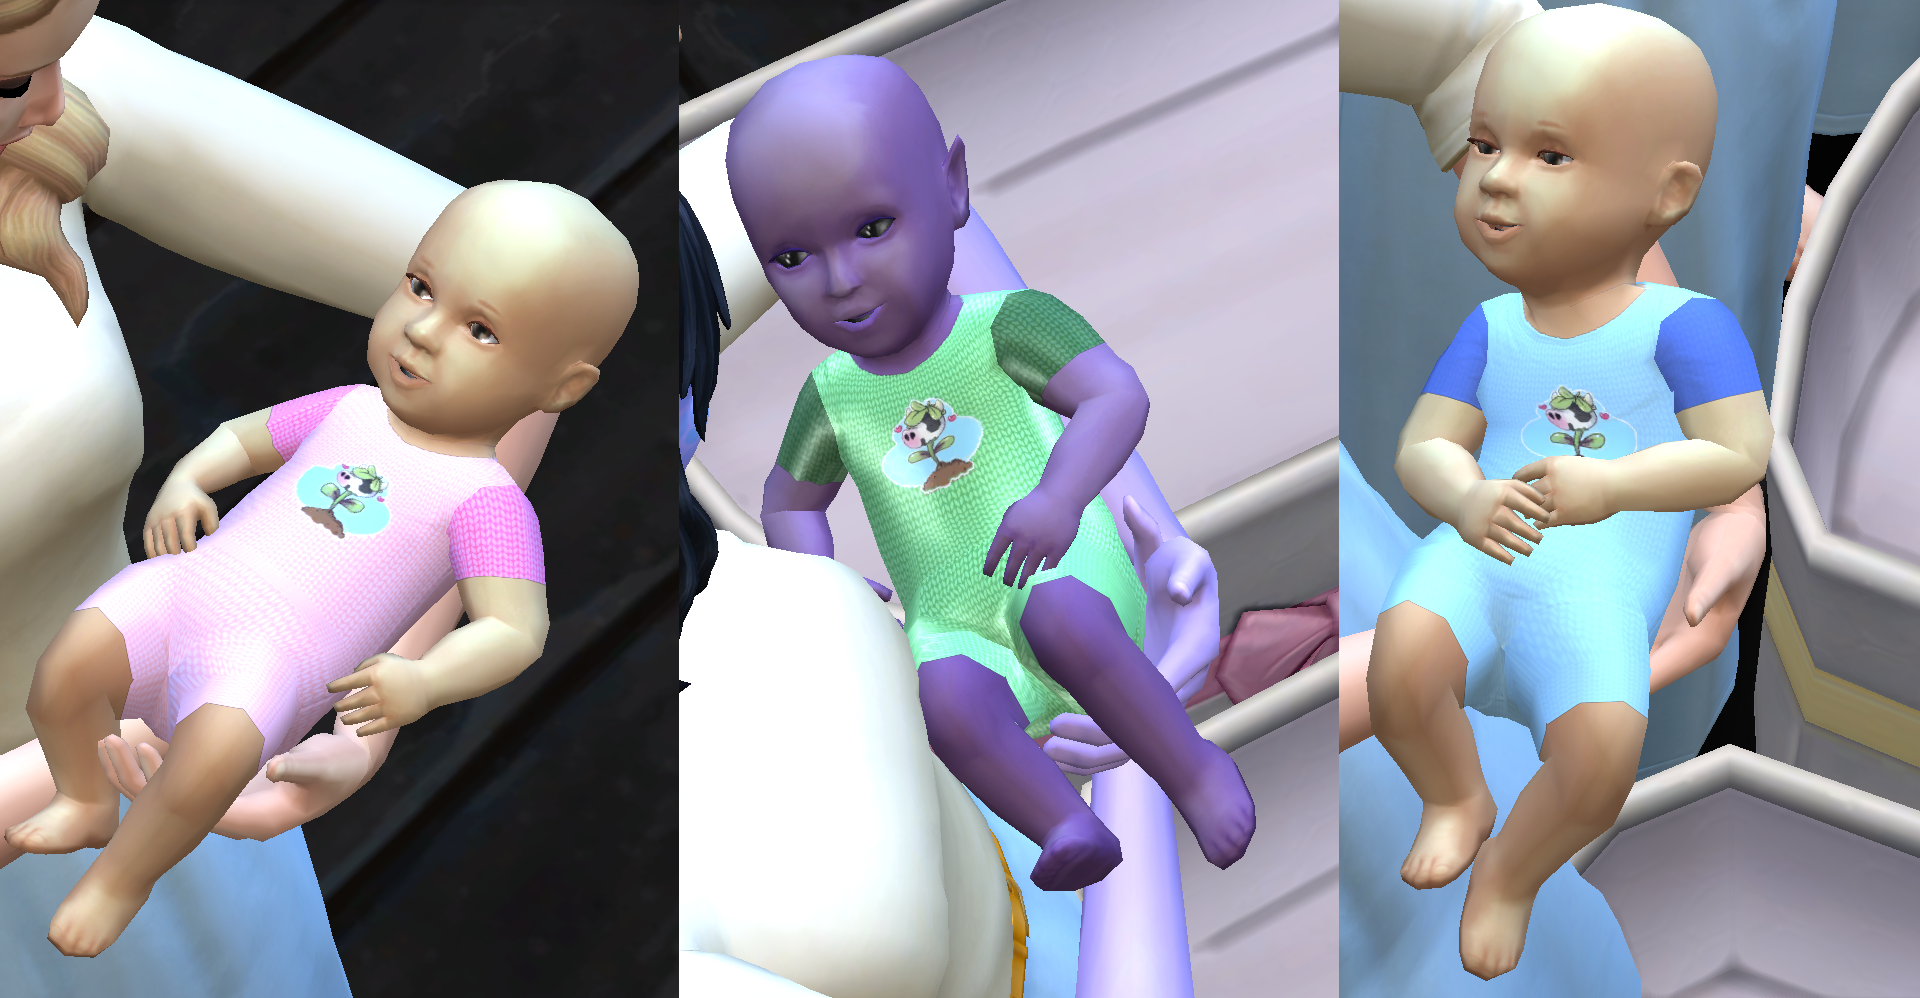 Cowplant summer baby outfit The Sims 4 Mods - CurseForge